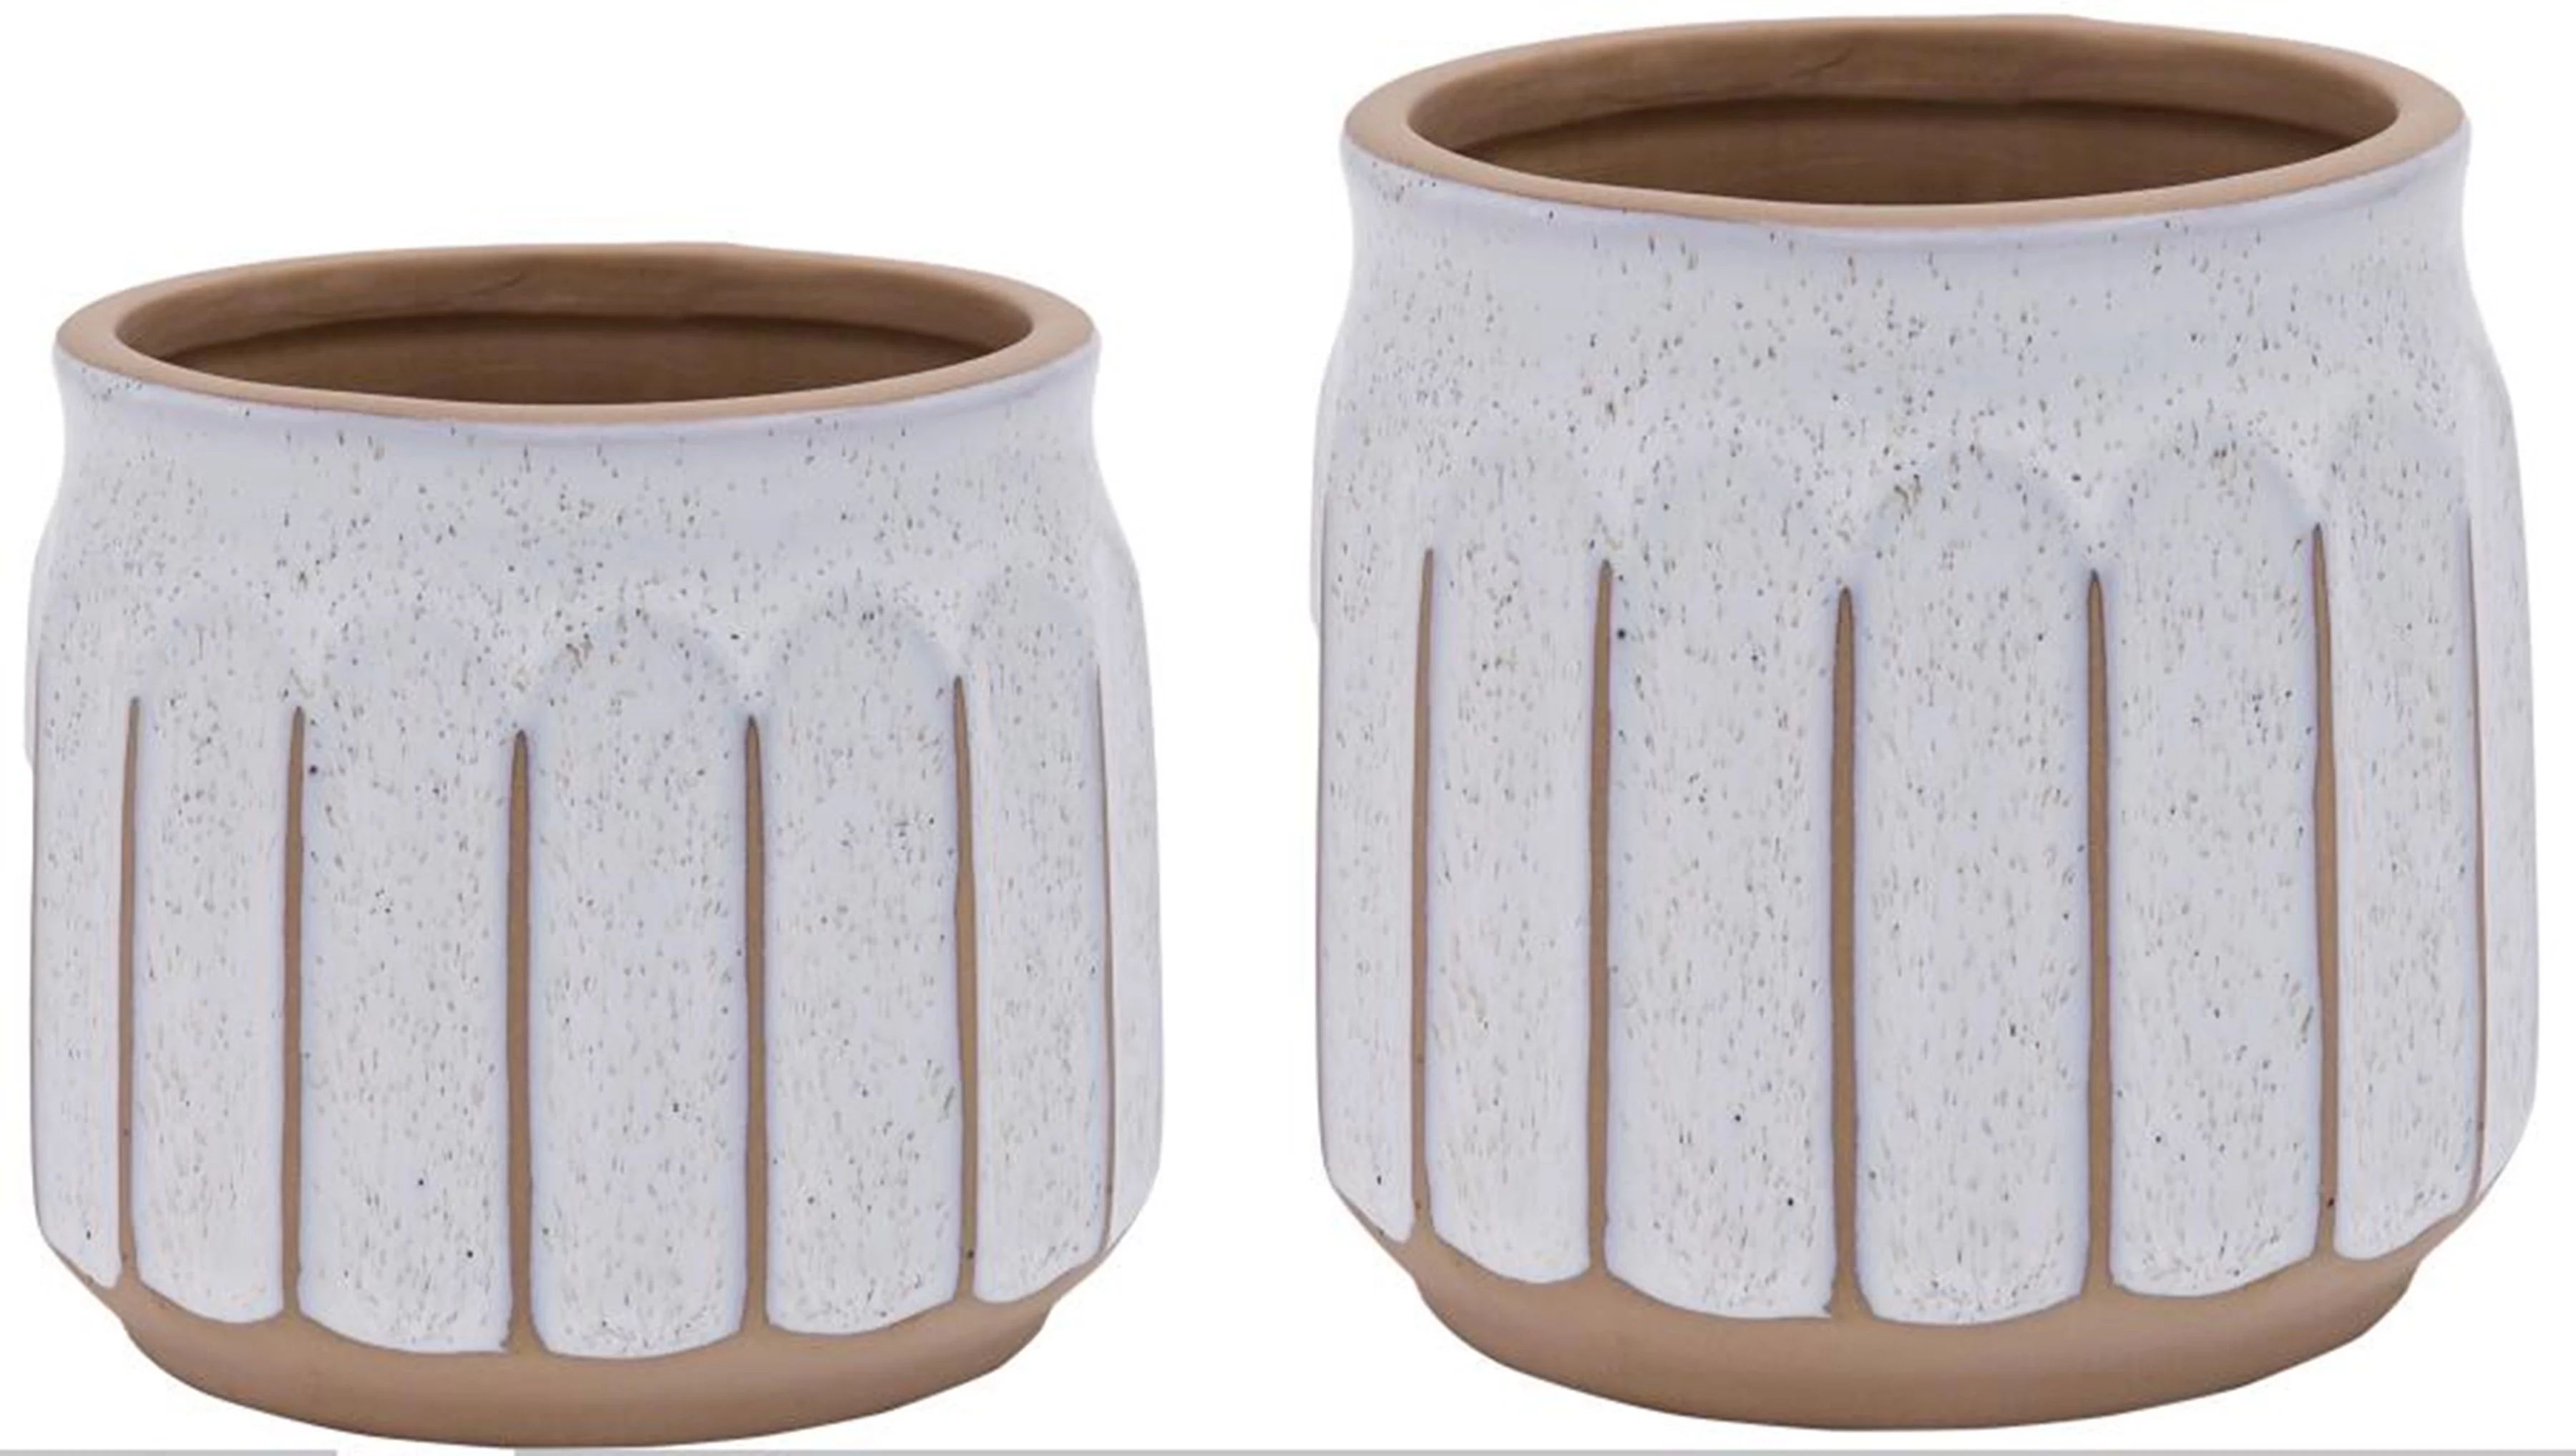 Better Homes & Gardens Assorted Round White and Brown Ceramic Plant Planters (2 Pack) - Walmart.c... | Walmart (US)